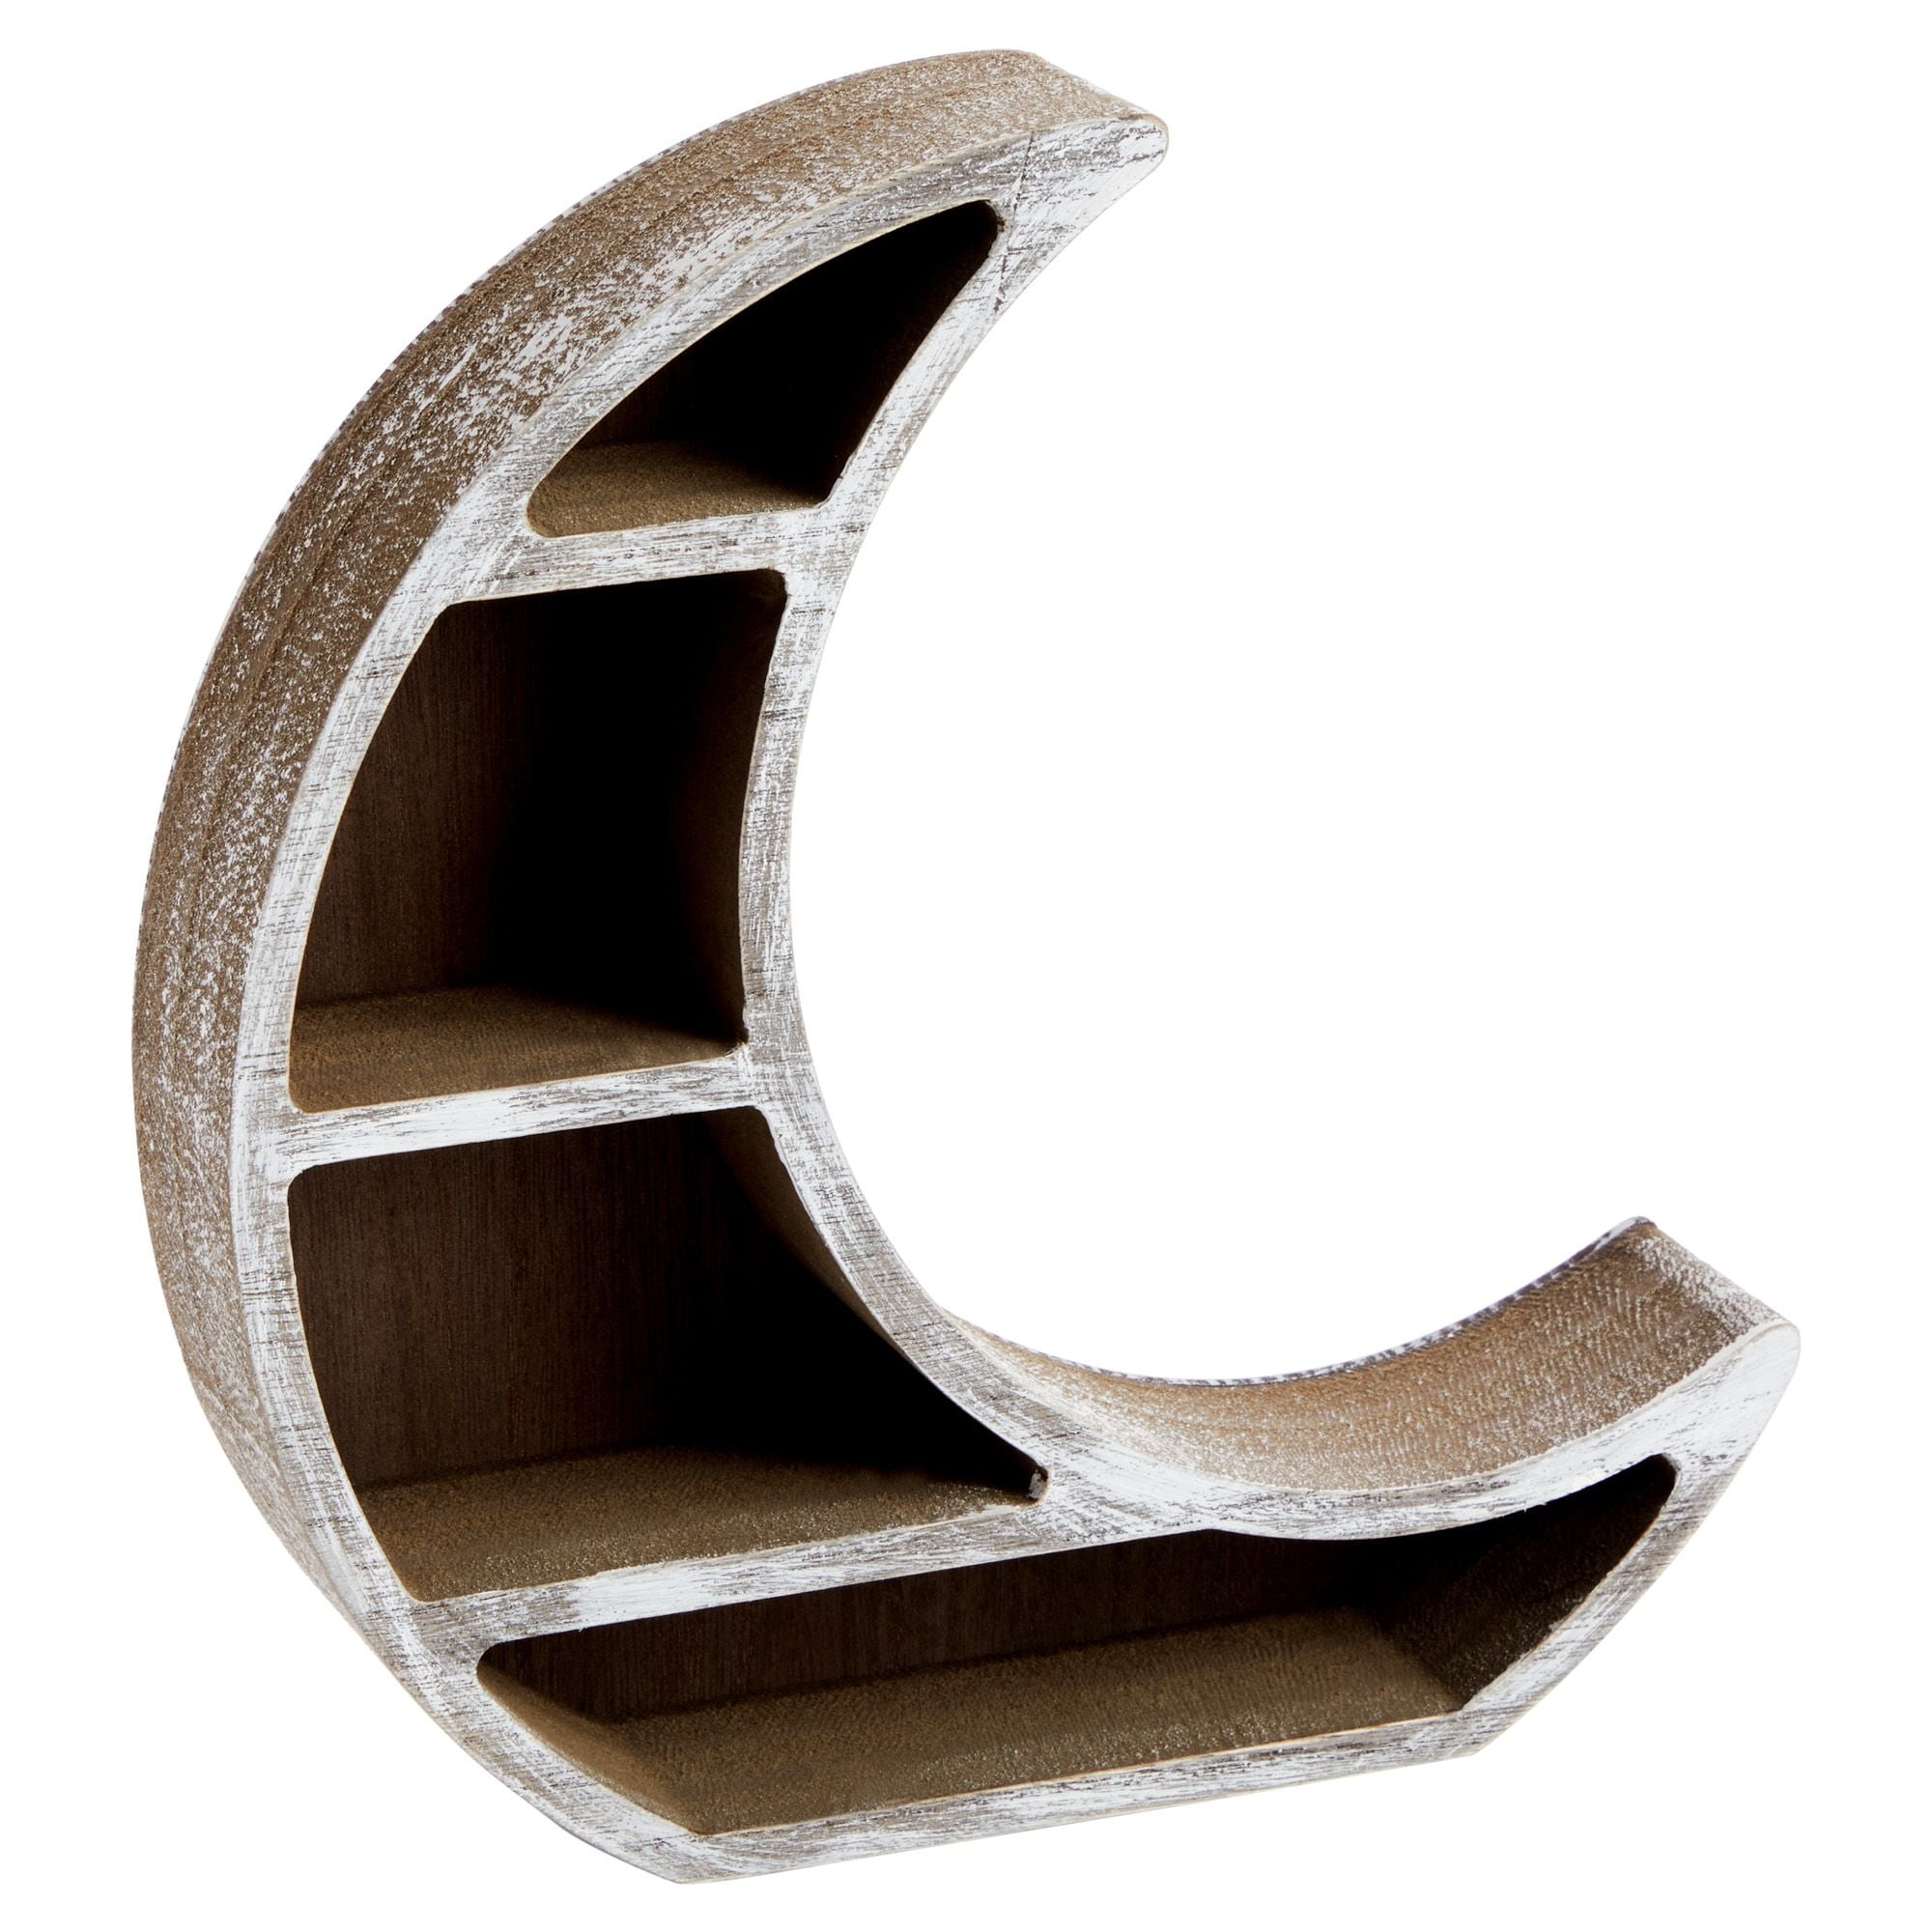 Wooden Crescent Moon Shelf for Crystal Display, Essential Oils,  Rustic-Style Home, Room Decor (Small, 10 x 10.2 x 2 In)